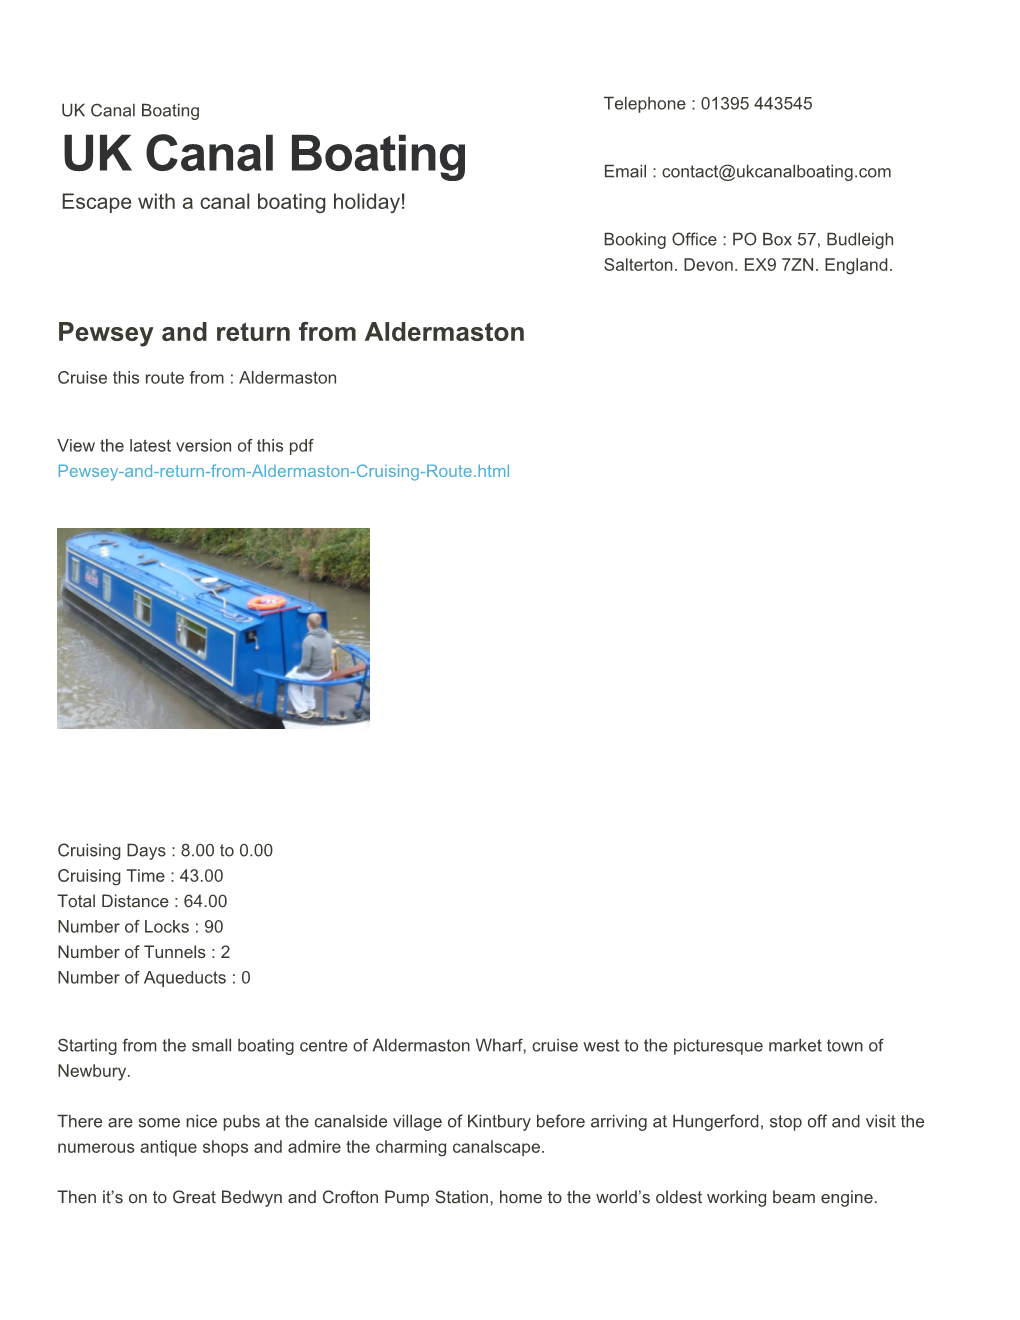 Pewsey and Return from Aldermaston | UK Canal Boating